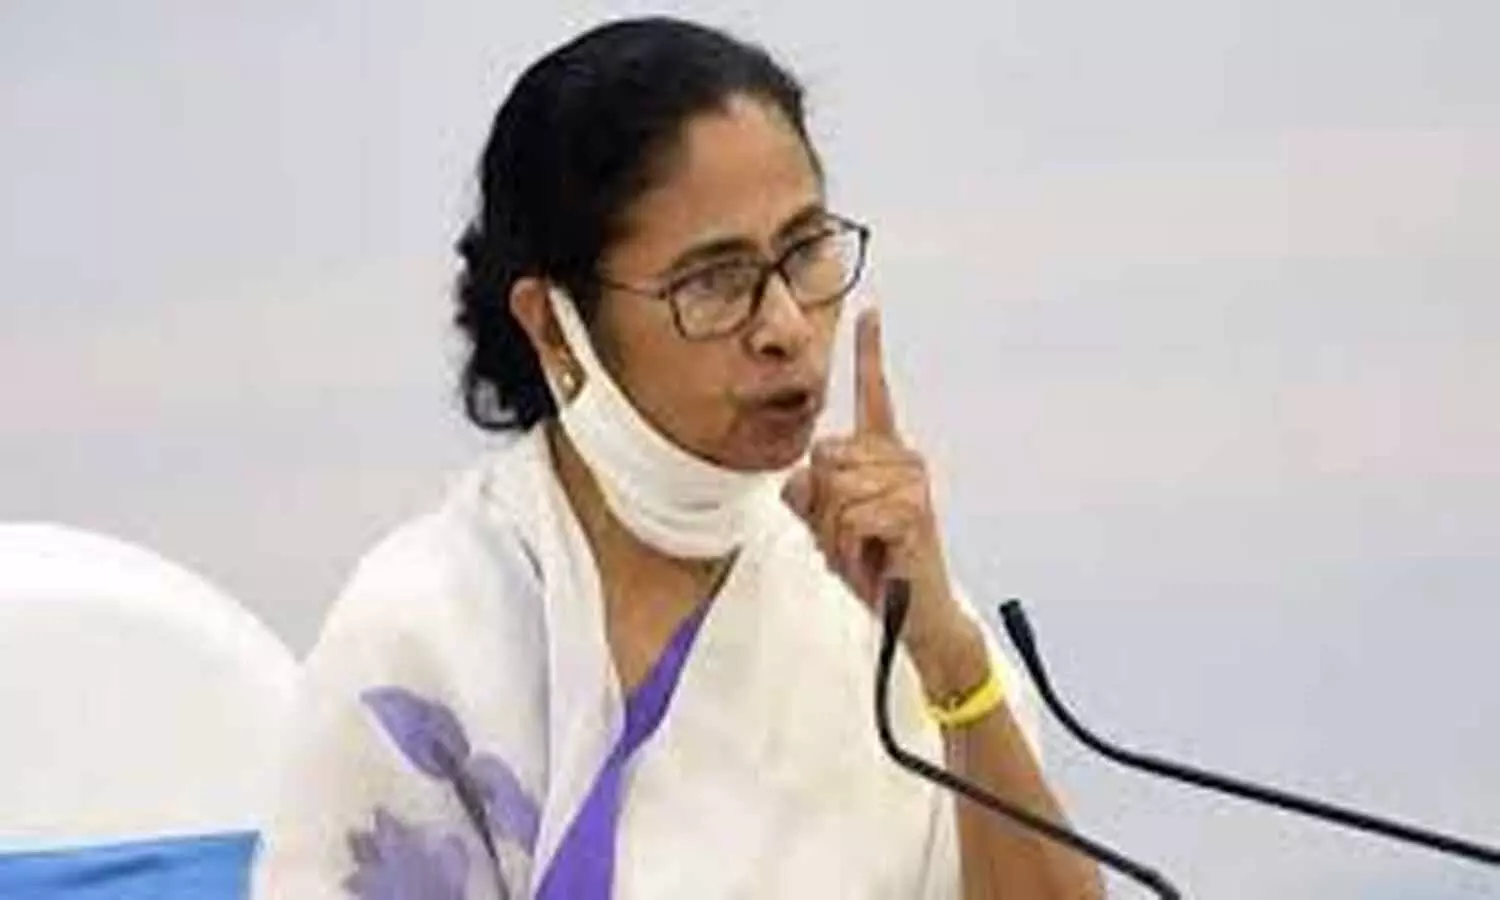 West Bengal CM inaugurates newly-built medical college campus with 100 MBBS seats